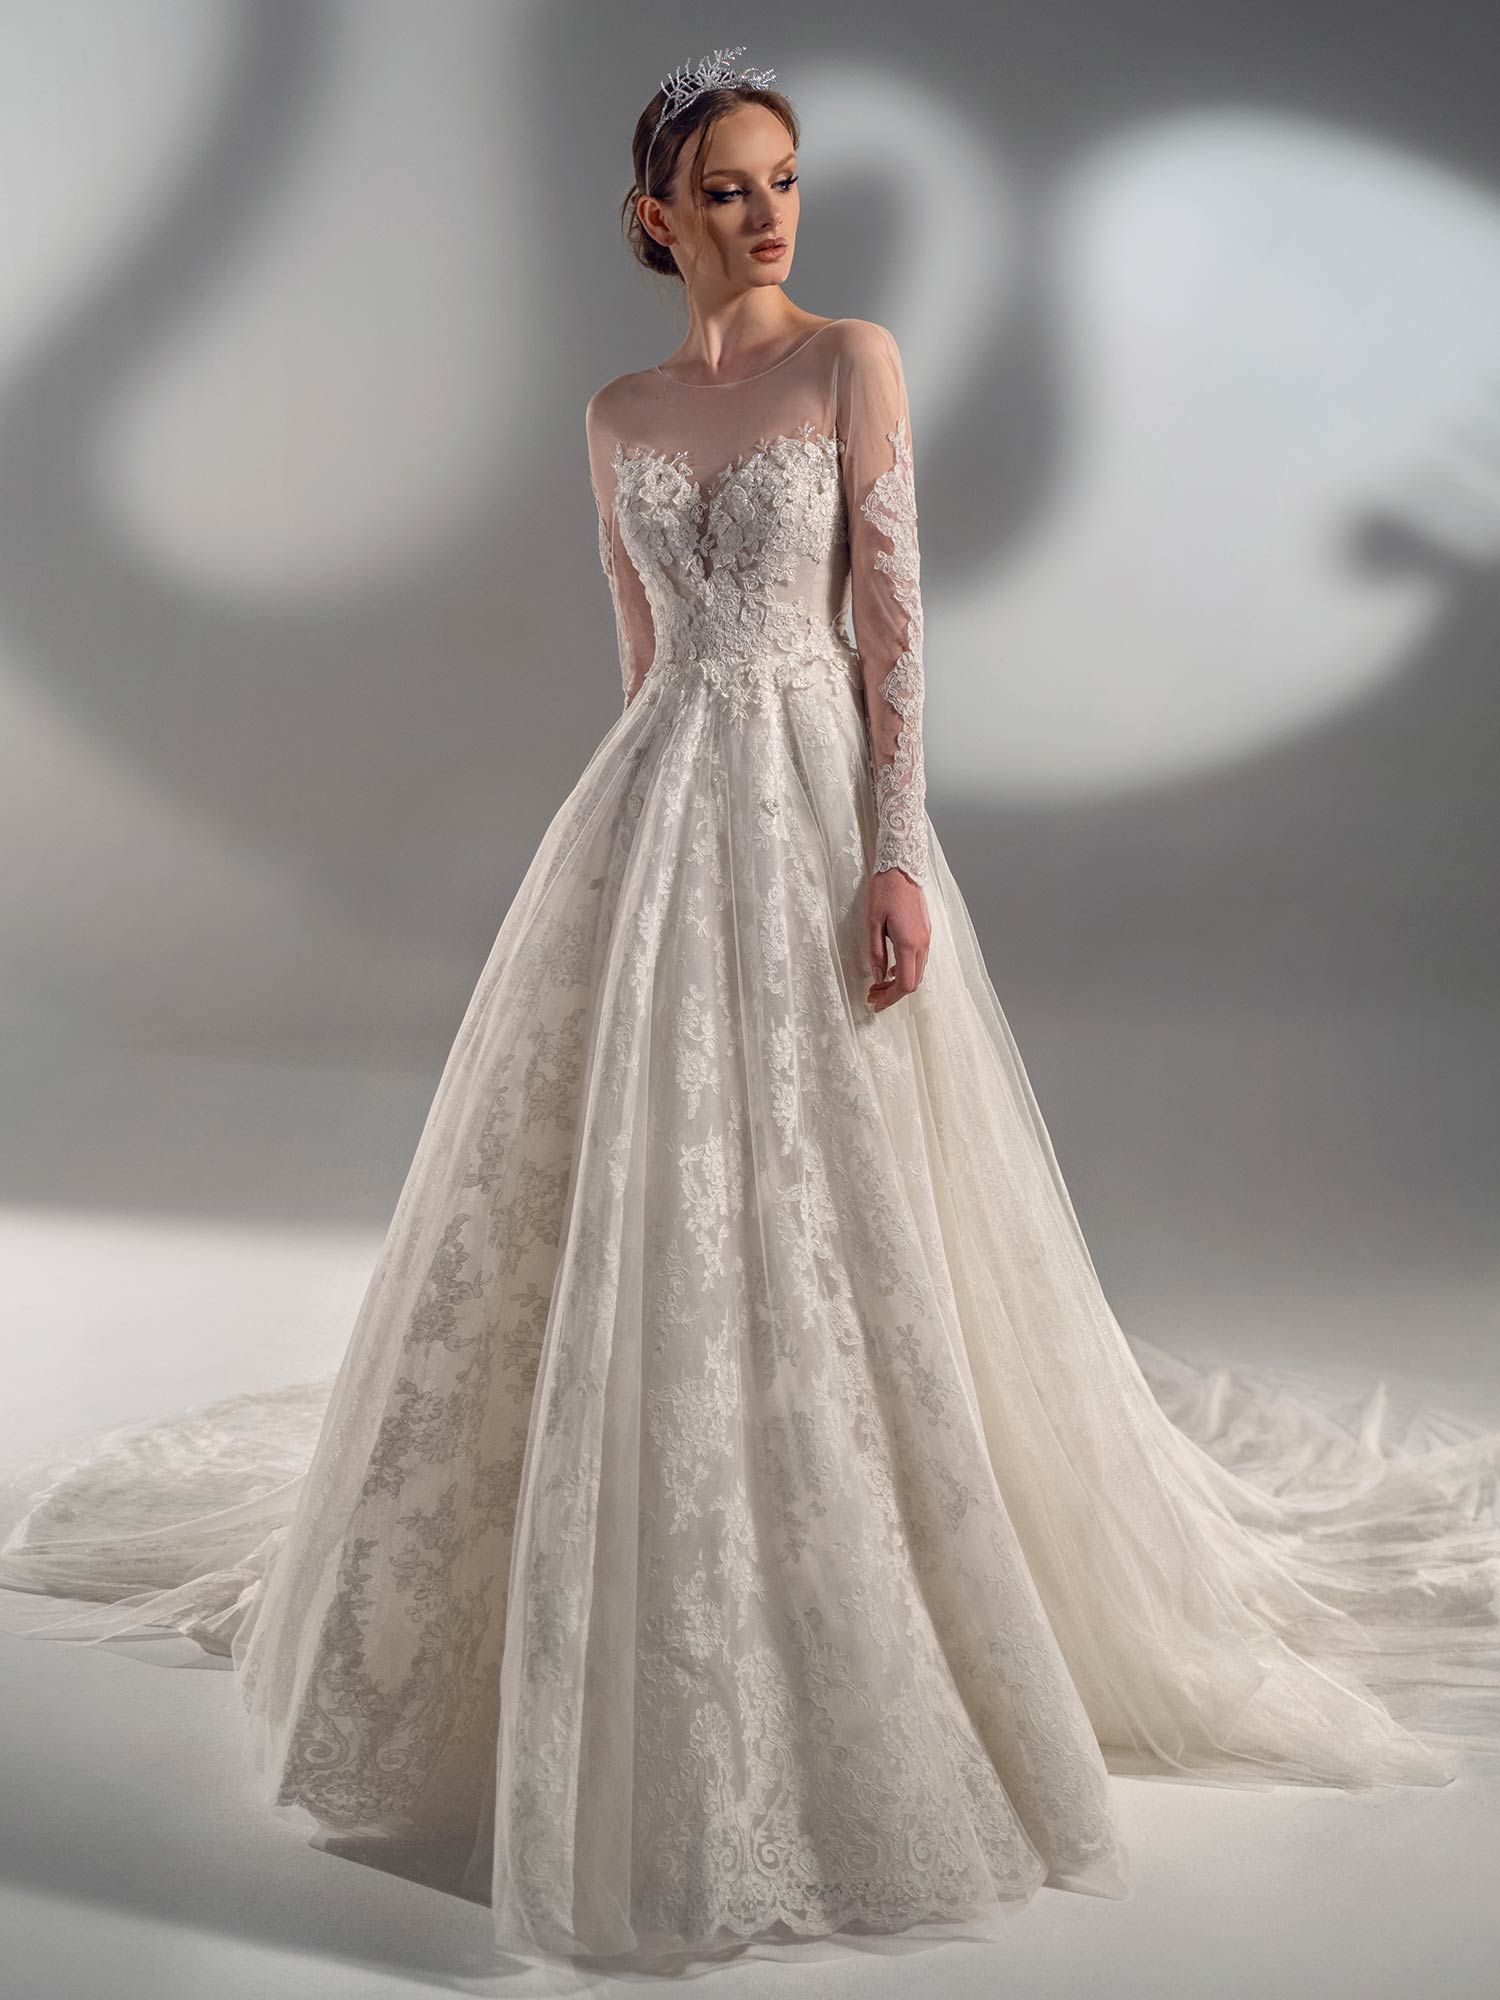 Strapless Ballgown Wedding Dress With Beaded Lace